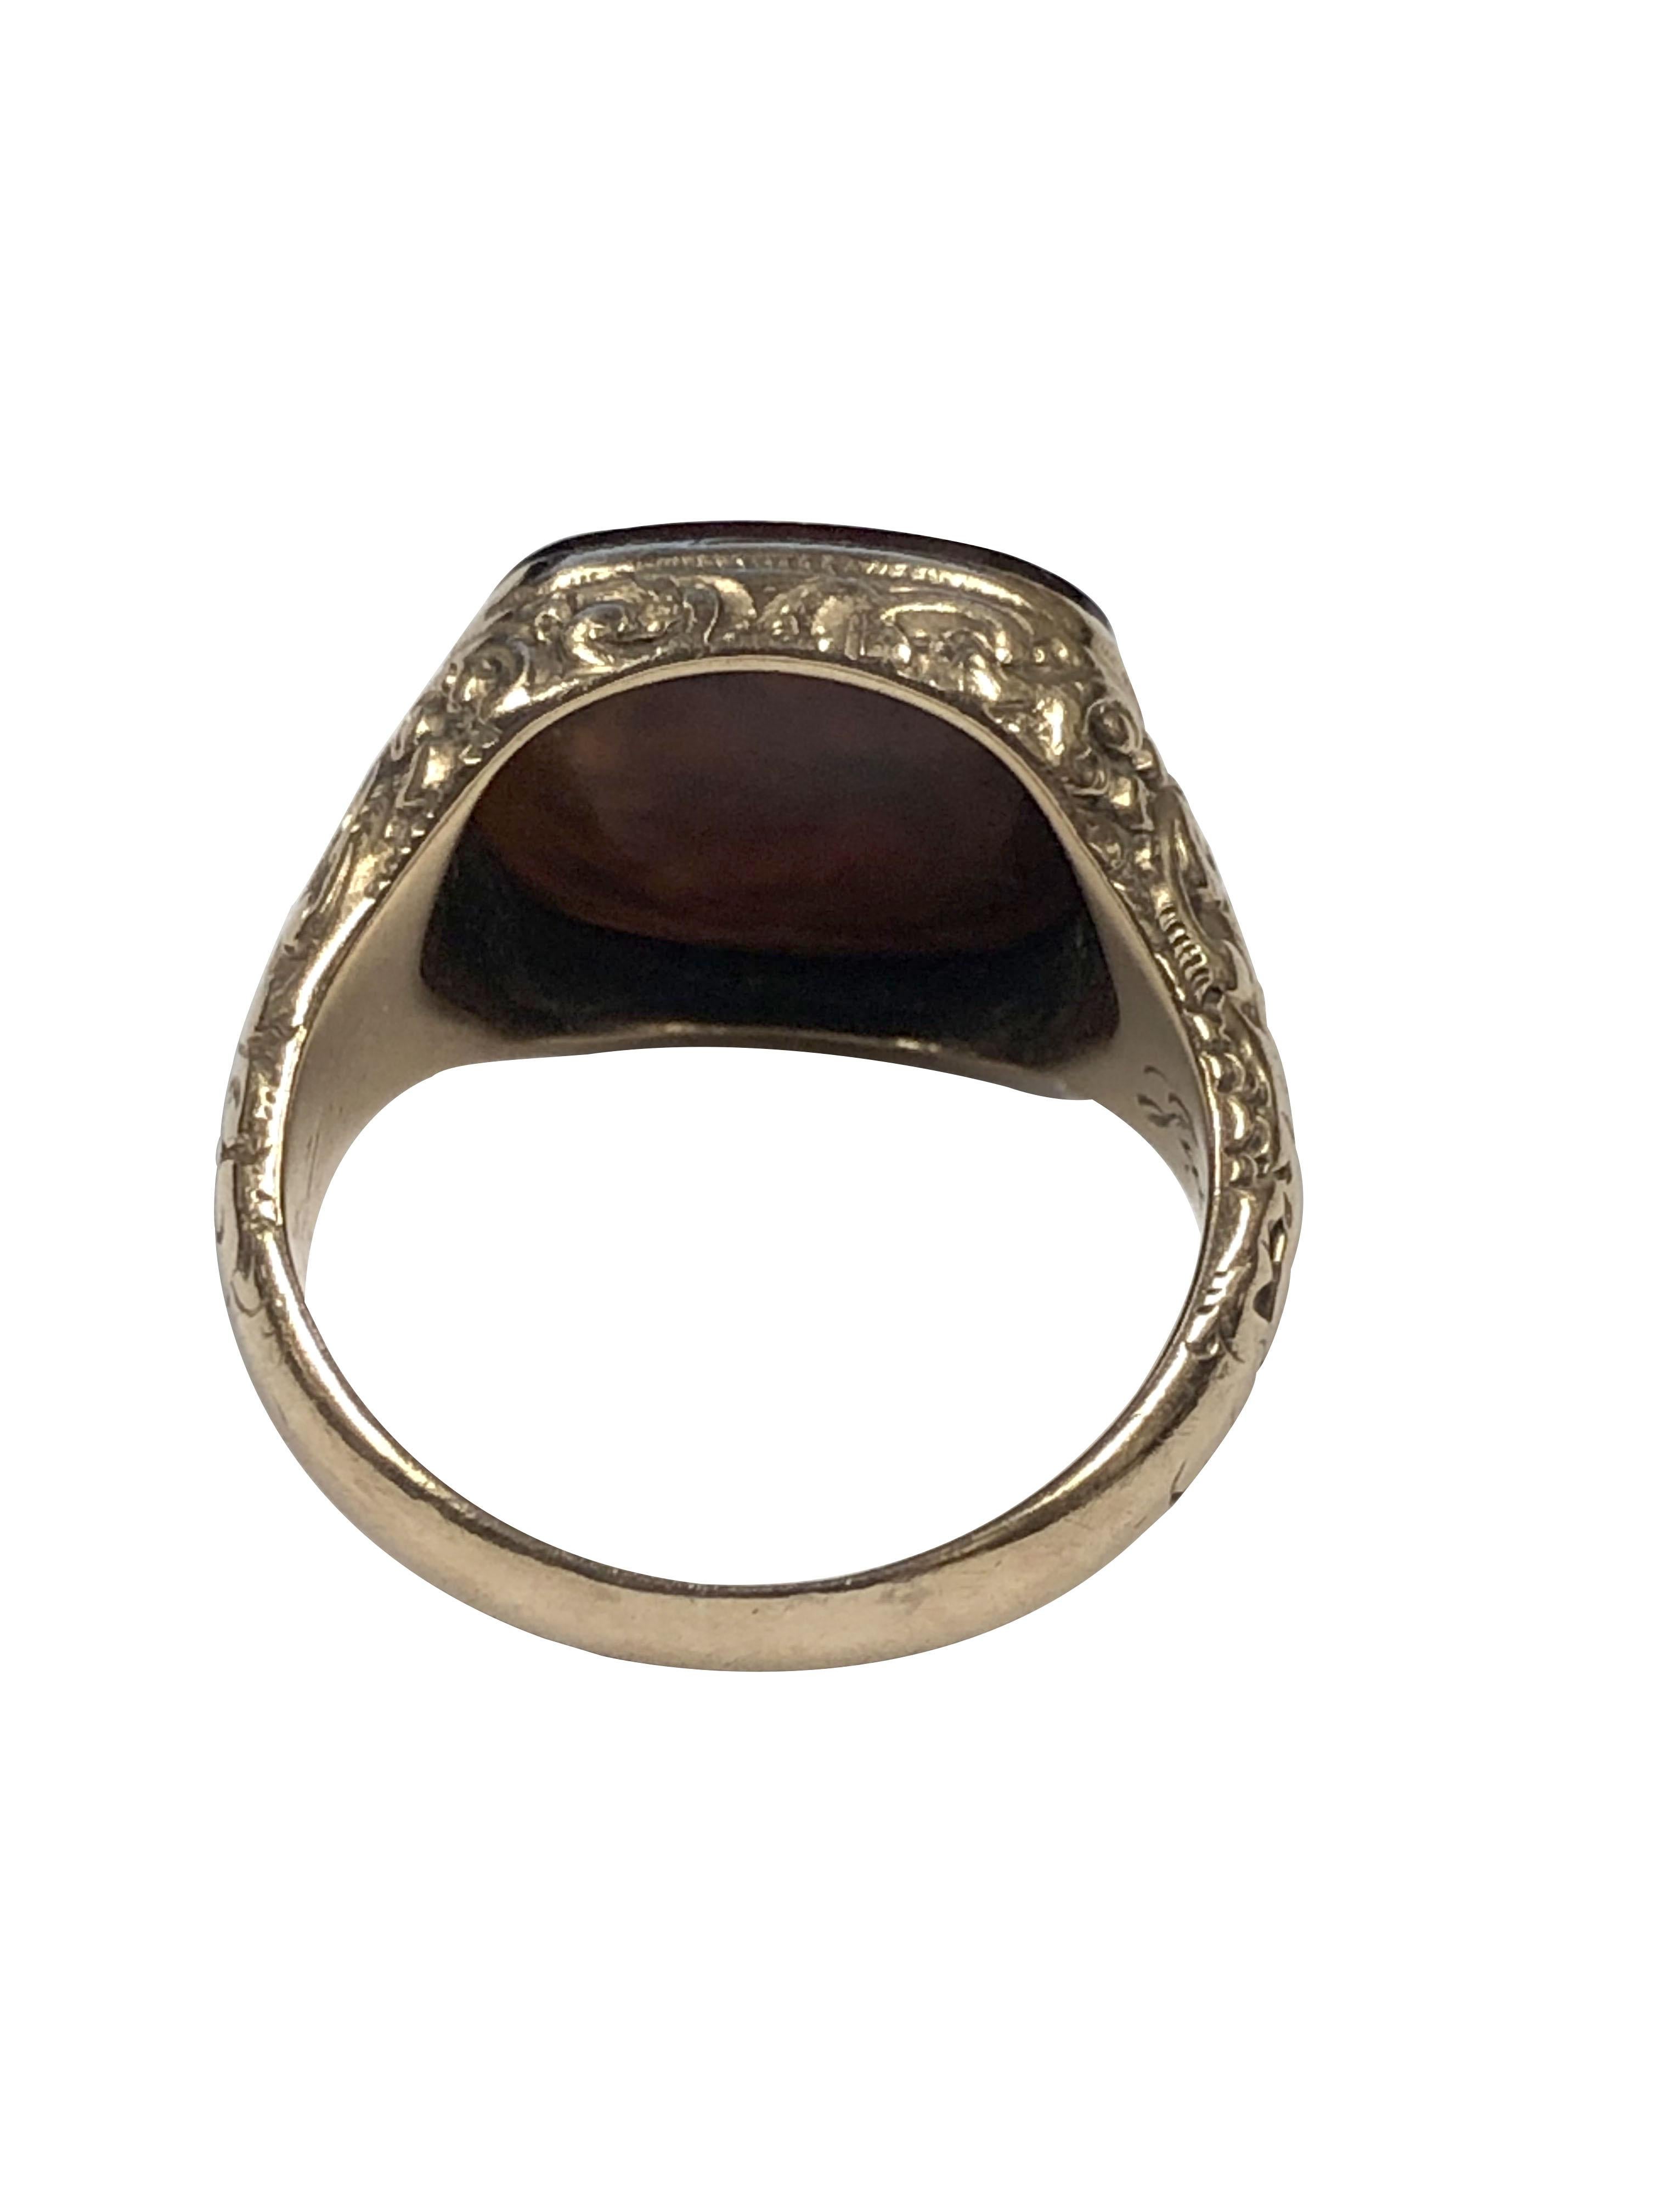 Antique Gold and Carnelian Intaglio Signet Ring In Good Condition For Sale In Chicago, IL